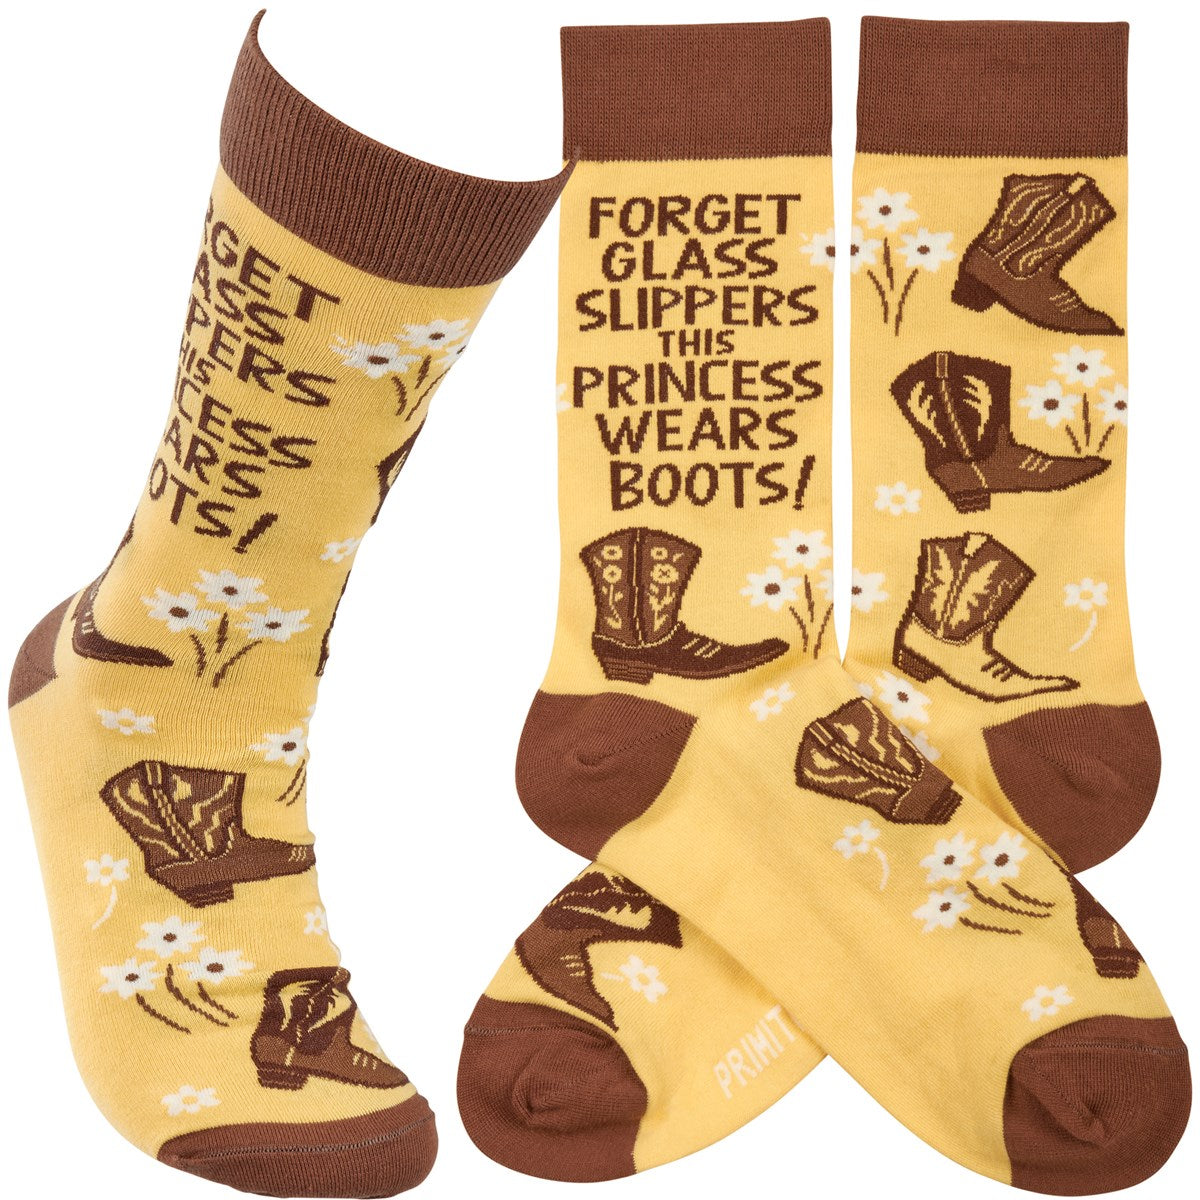 Brown & yellow sock with forget glass slippers this princess wears boots.